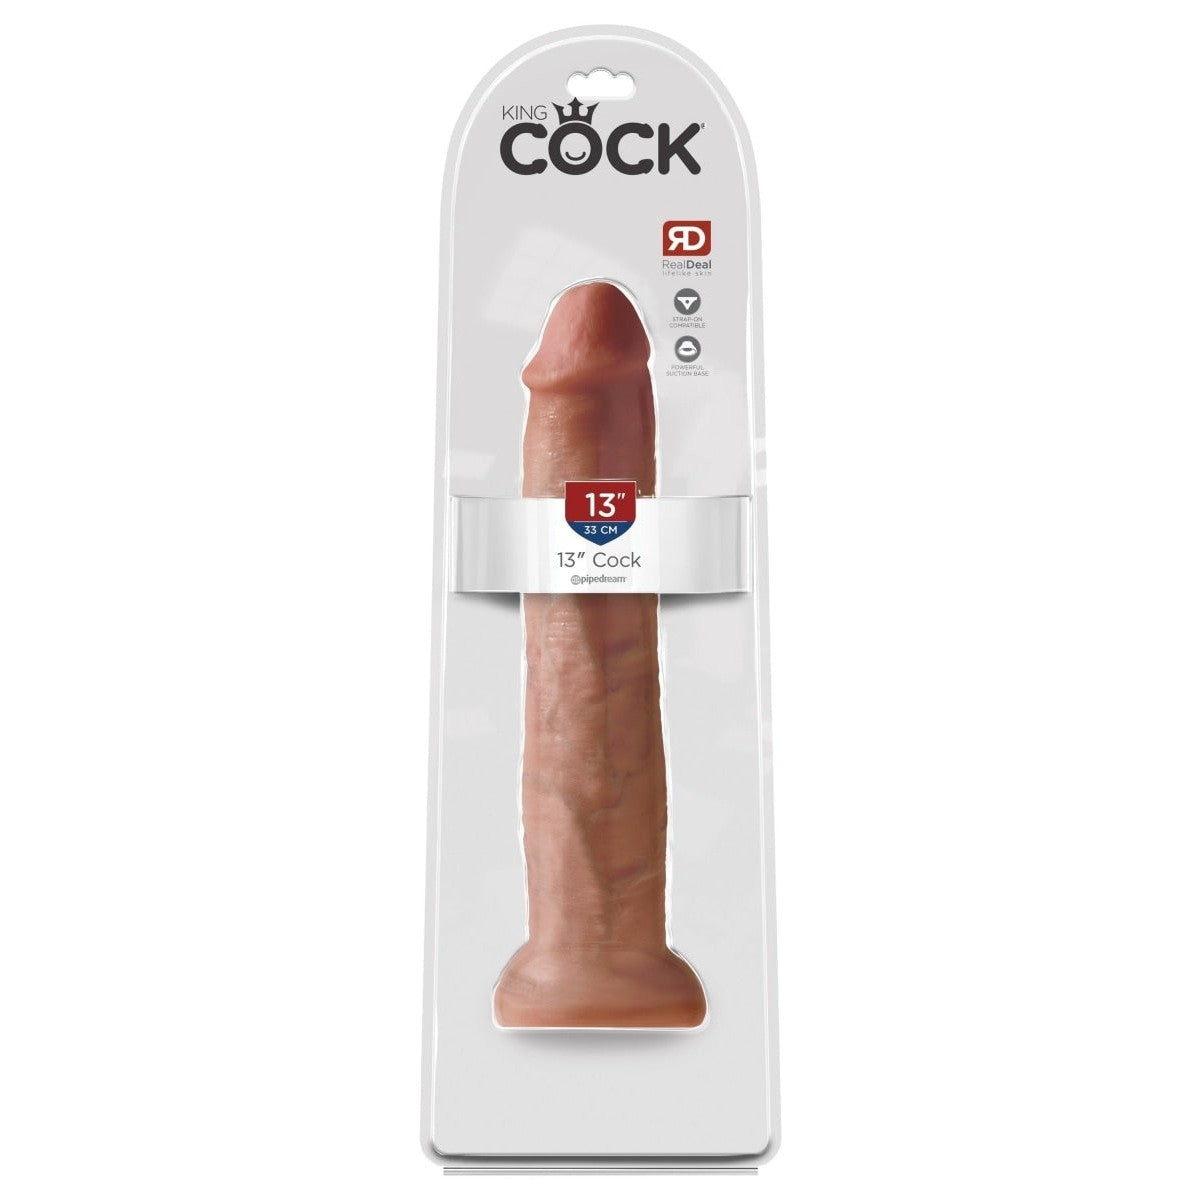 King Cock 13 In Cock Tan Intimates Adult Boutique